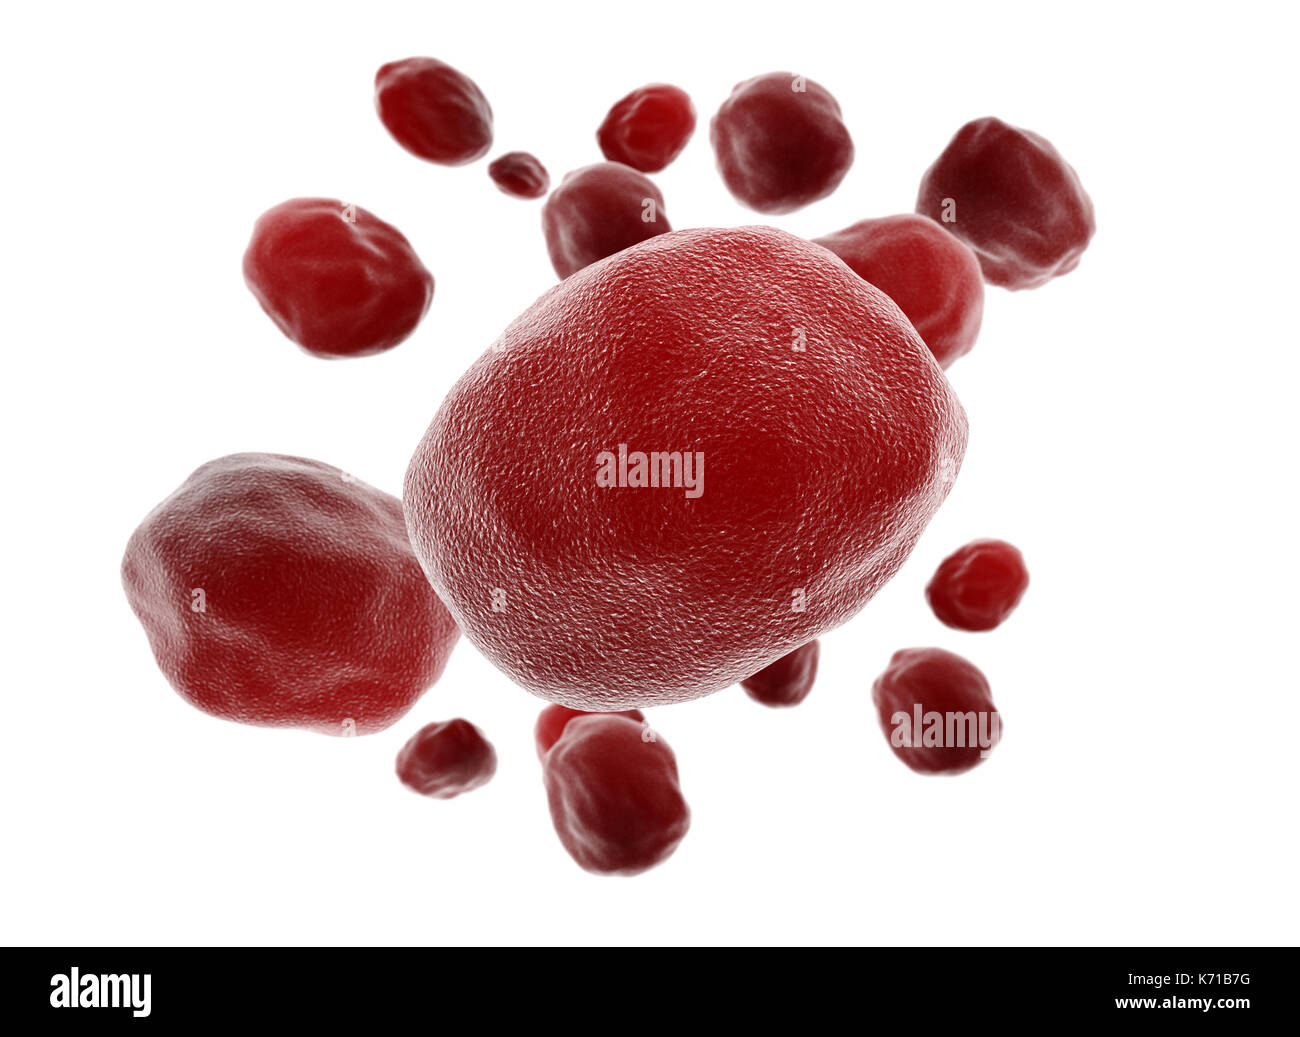 Red abnormal blood cells isolated on white background Stock Photo